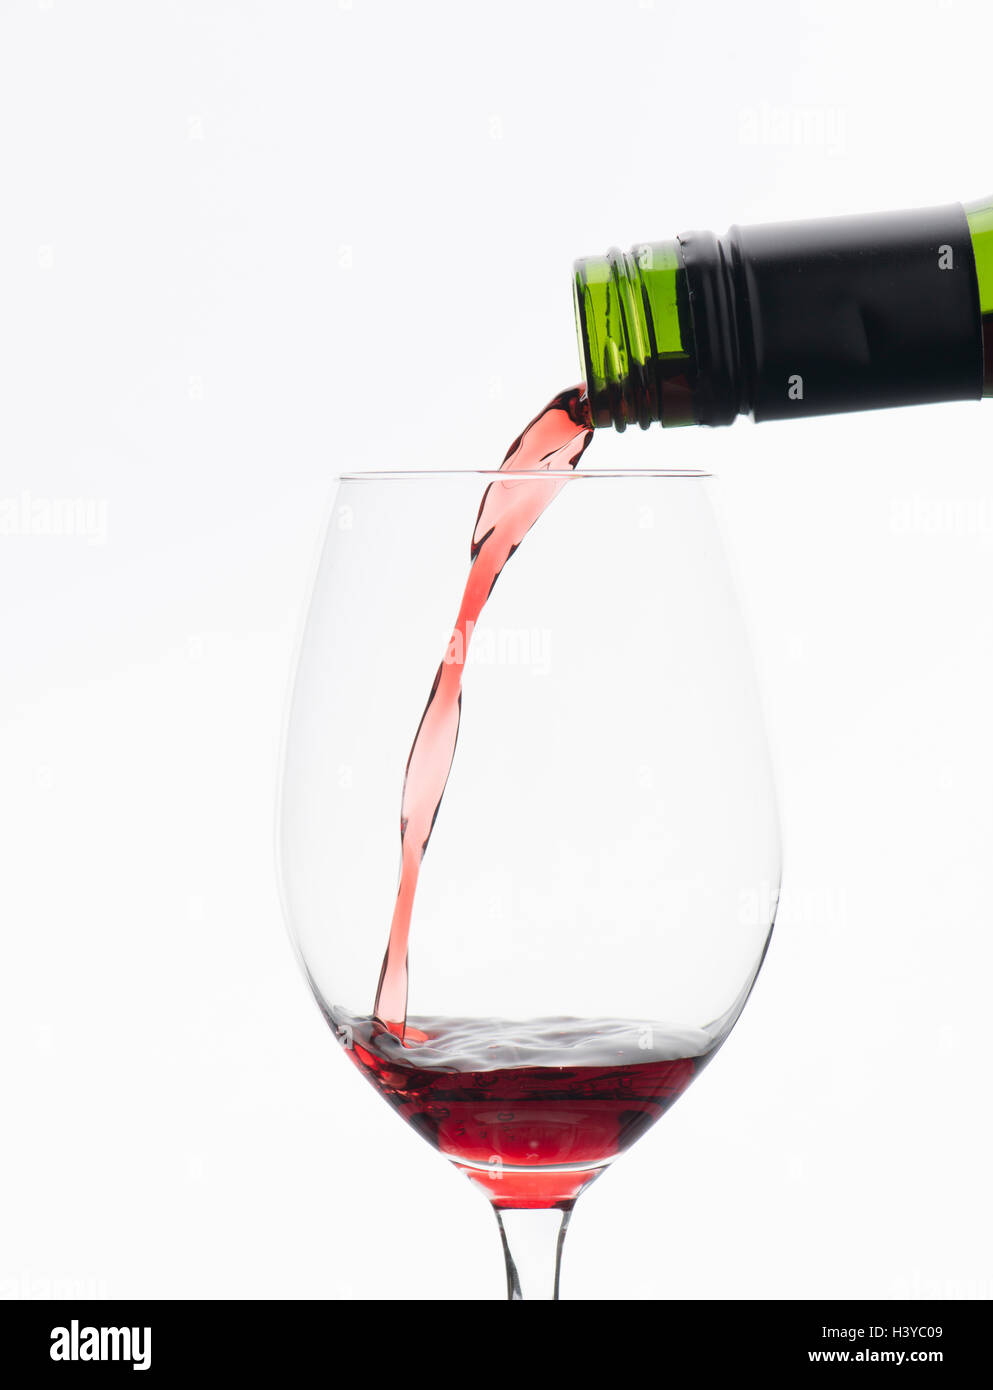 Red wine pouring from bottle in wineglass. Isolated on white background. Stock Photo